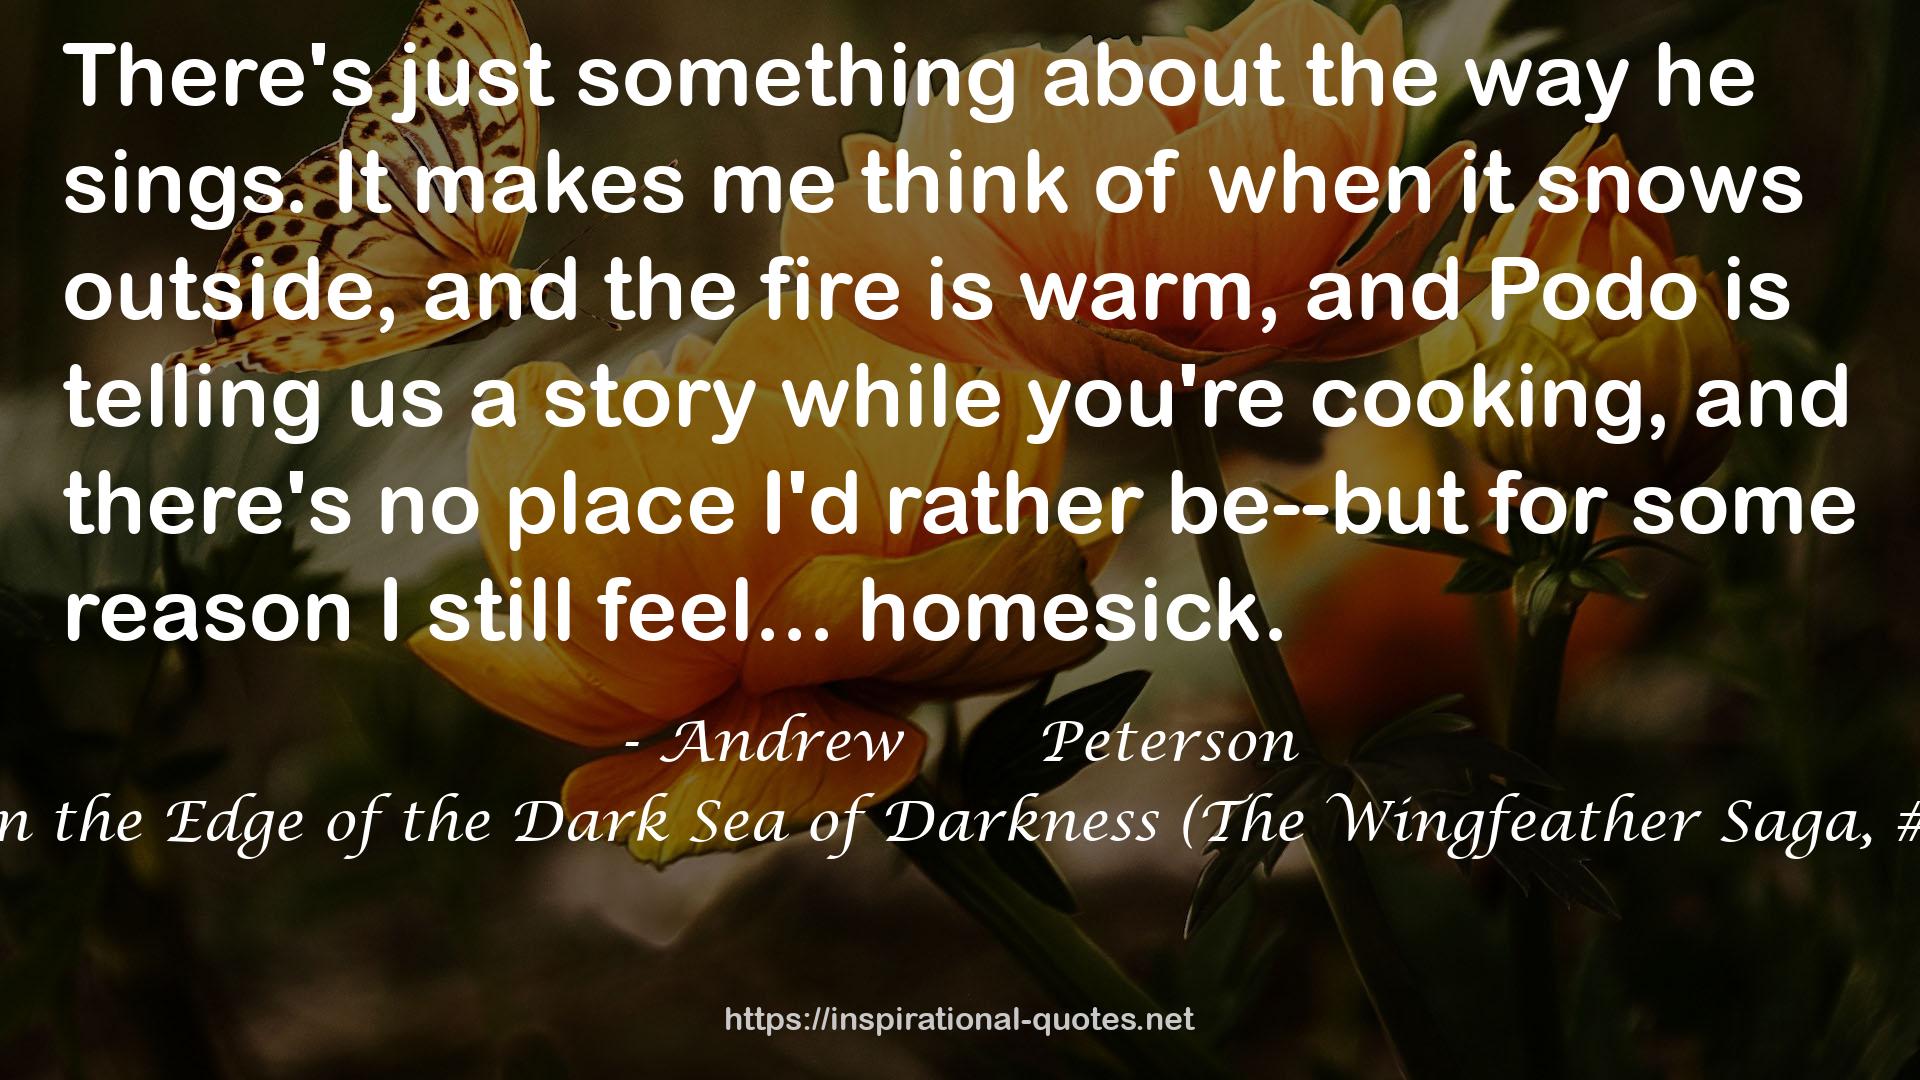 On the Edge of the Dark Sea of Darkness (The Wingfeather Saga, #1) QUOTES